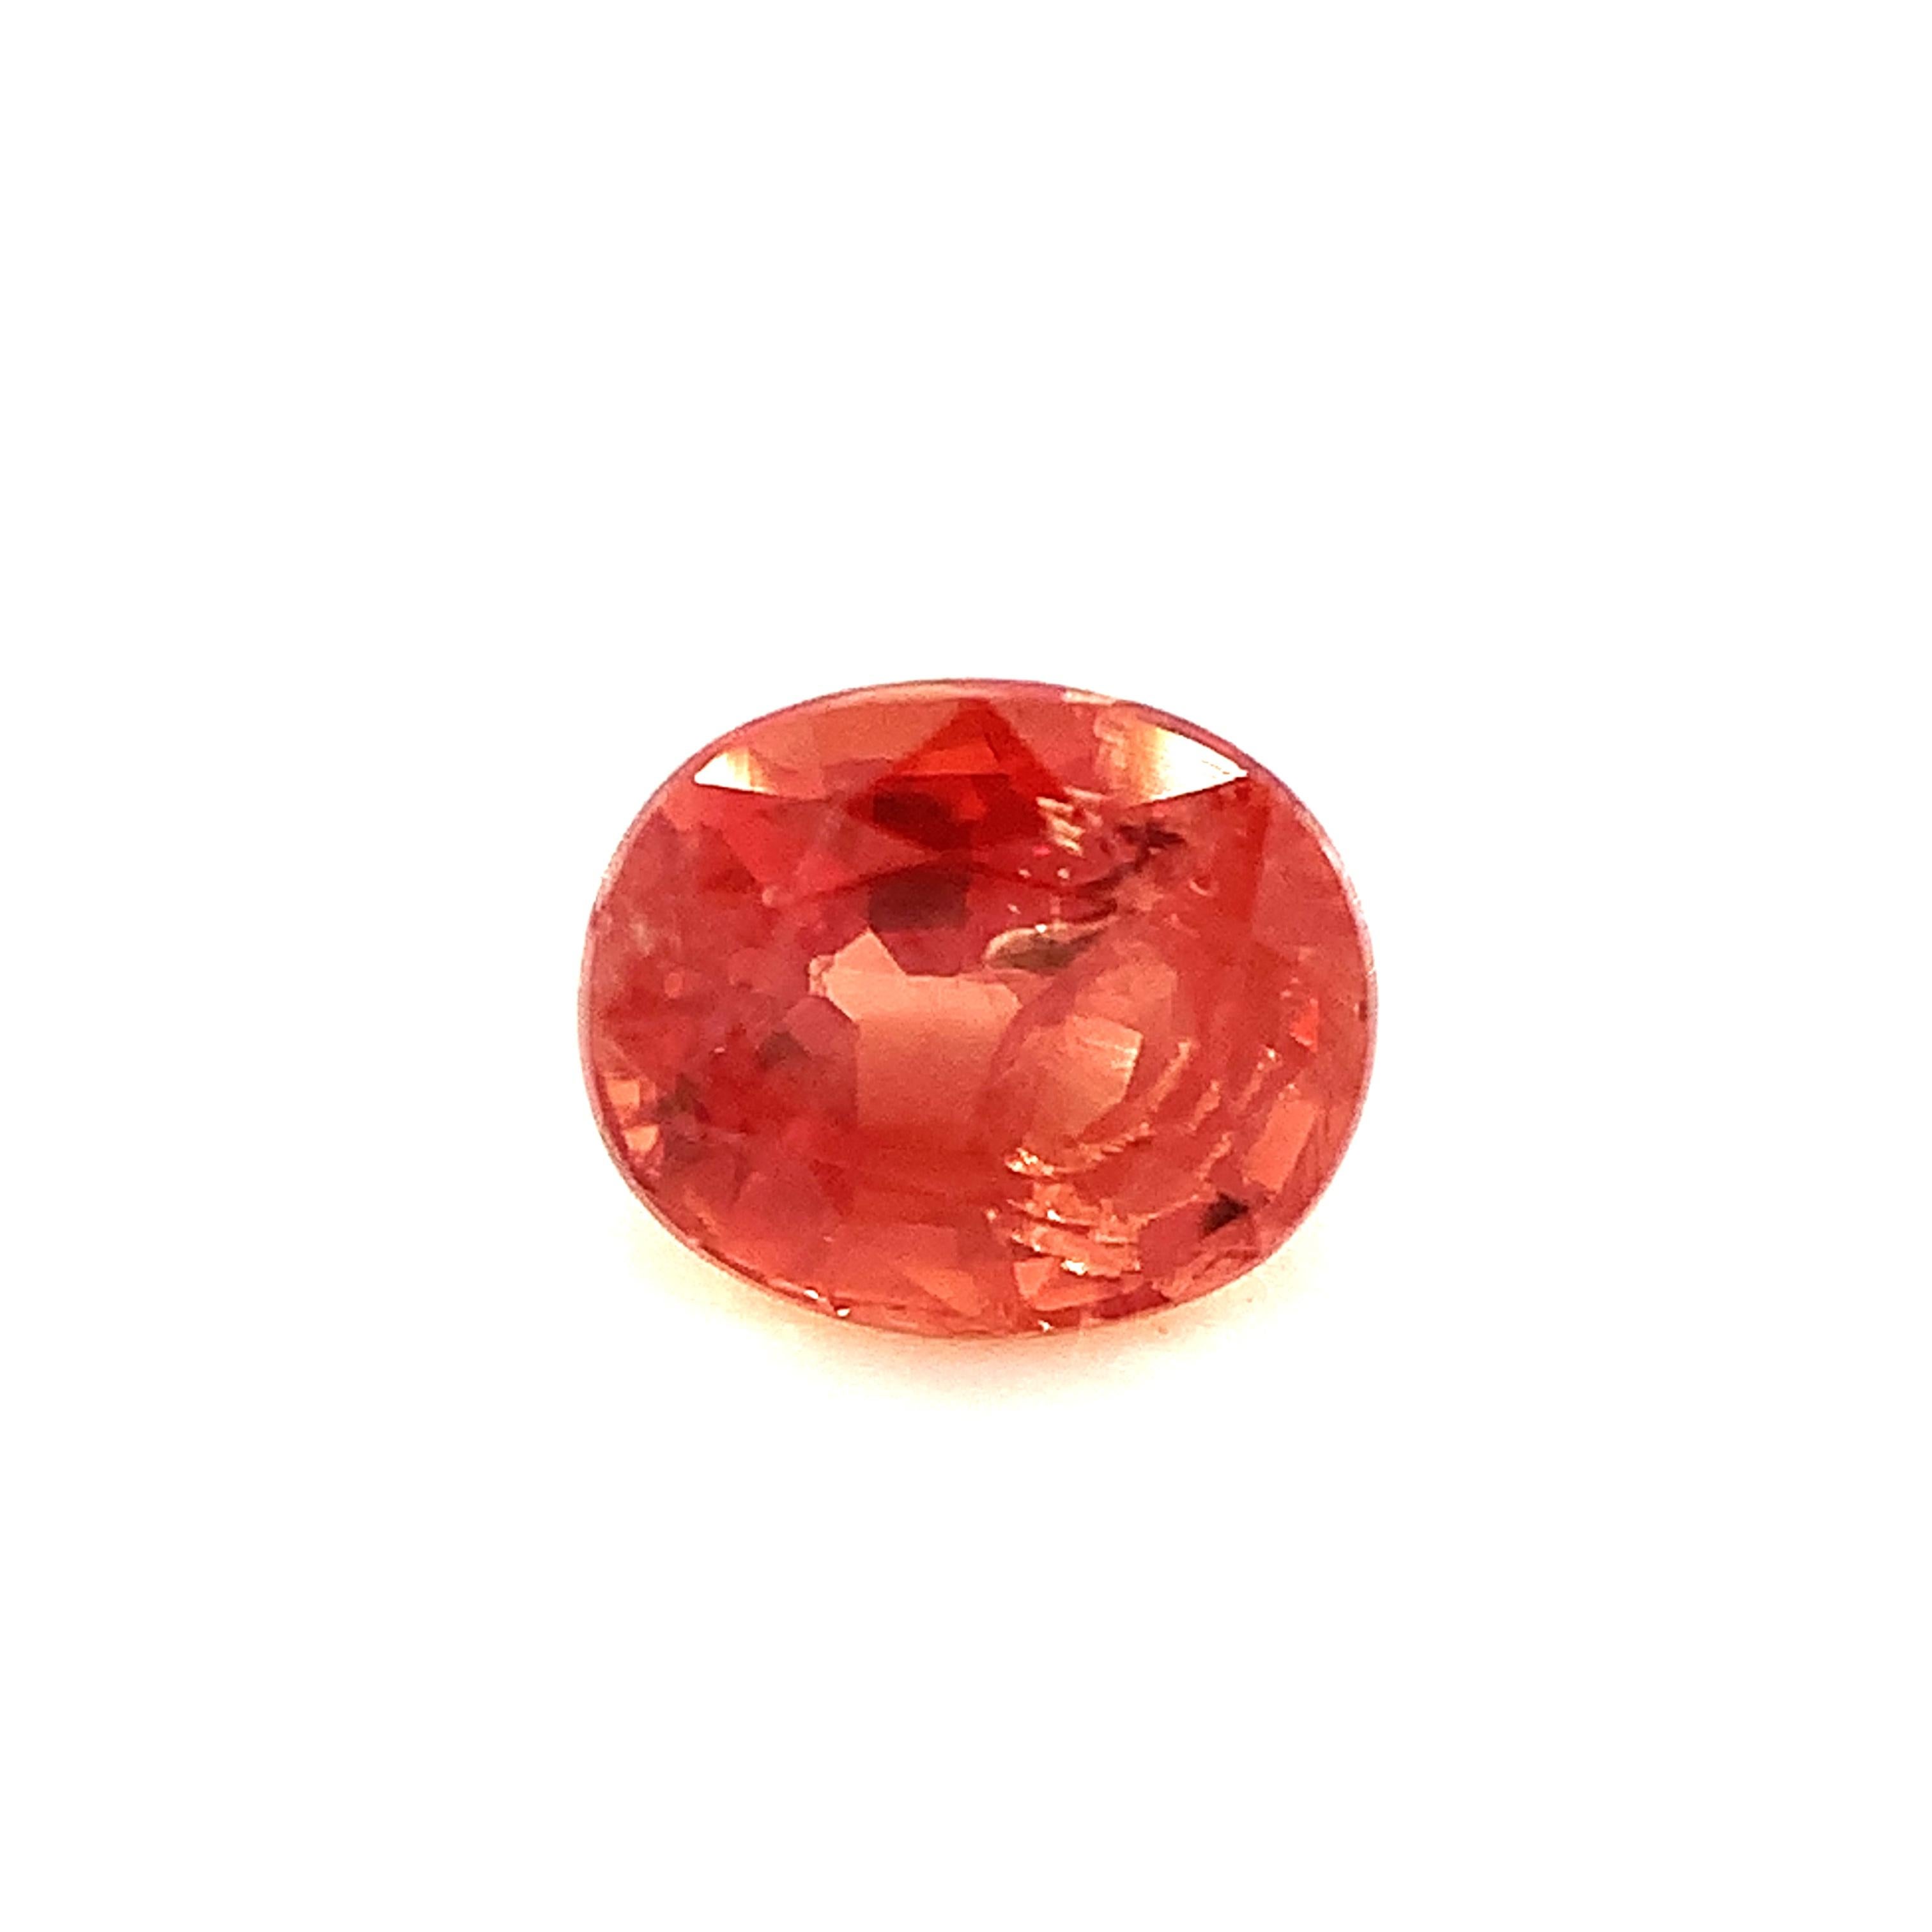 Unheated .75 Carat Padparadscha Sapphire, Unset Loose Gemstone, GIA Certified For Sale 2